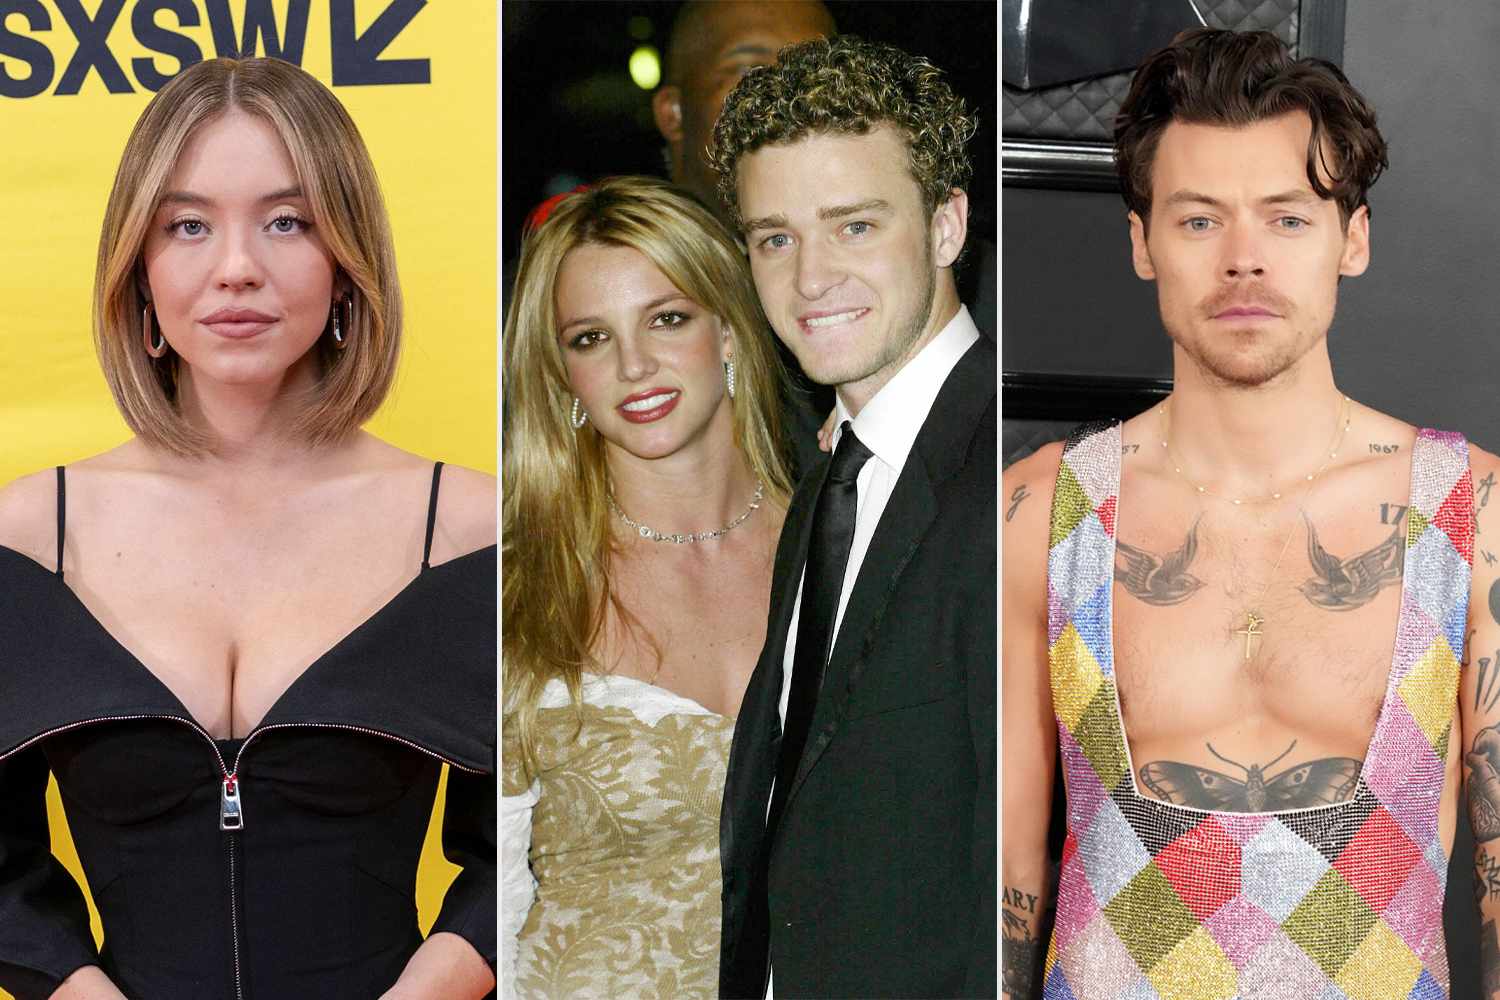 Who should play Britney Spears and Justin Timberlake in 'The Woman in Me' biopic?